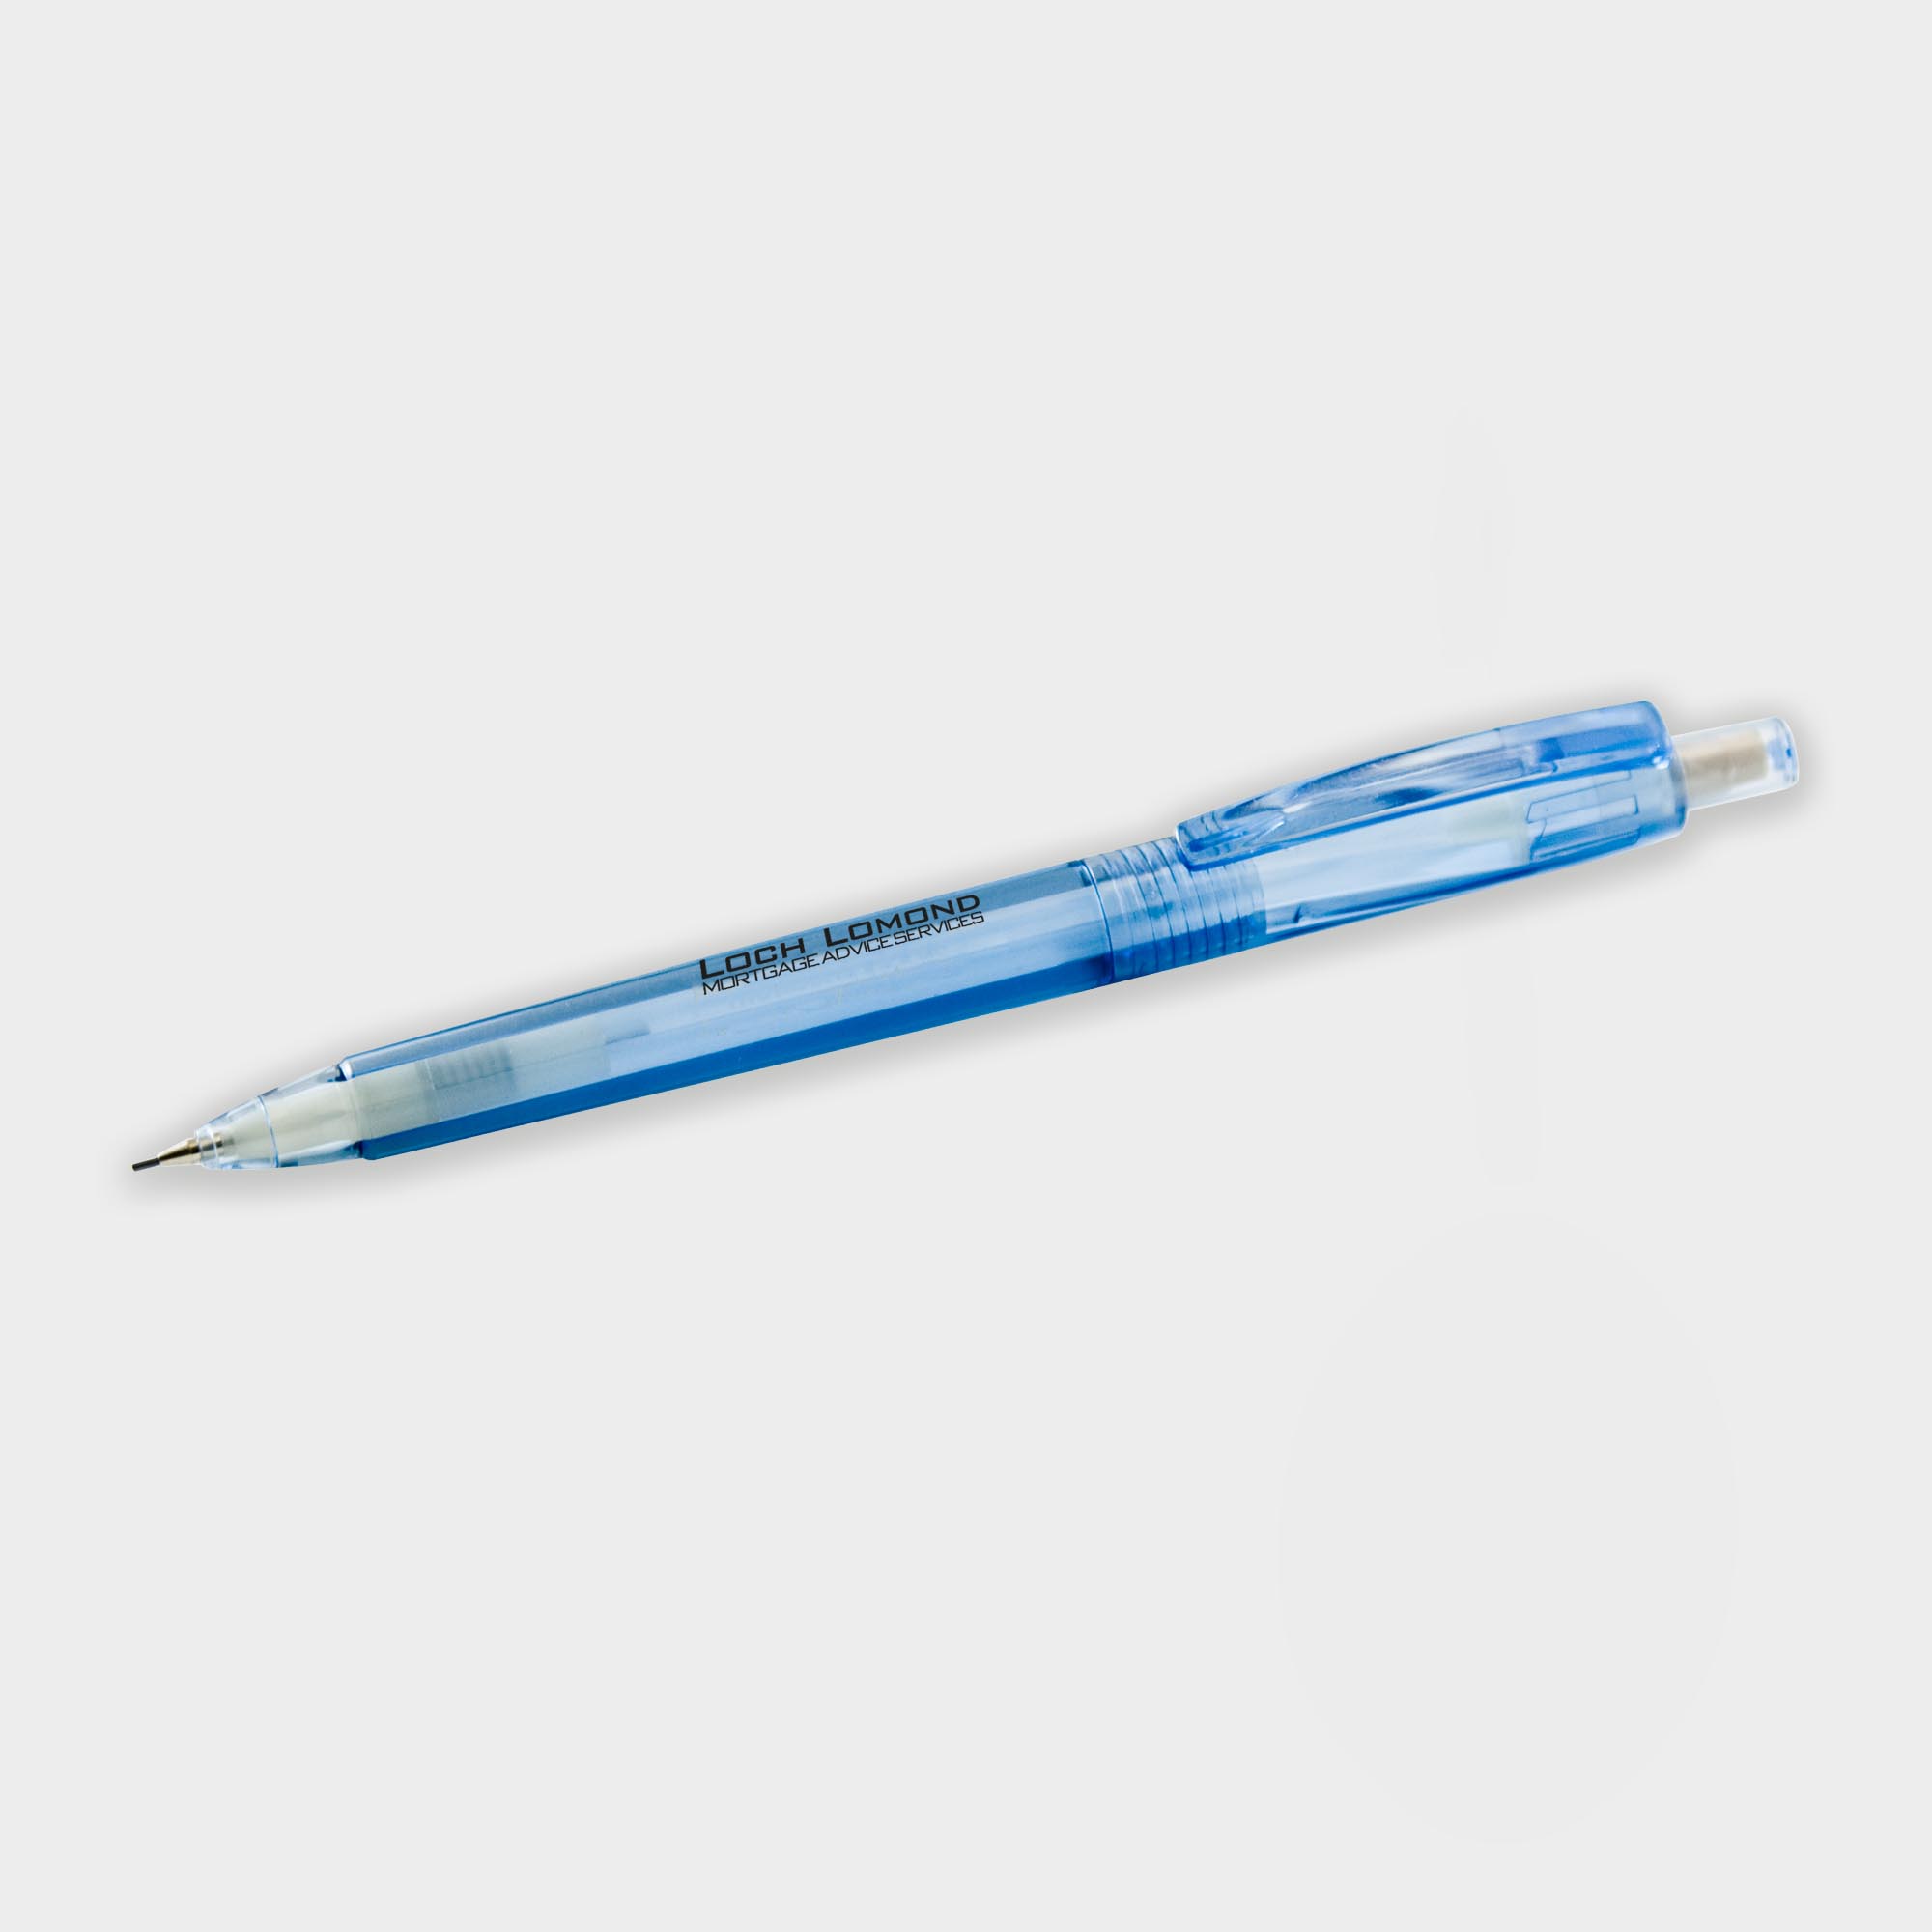 The Green & Good Severn Pencil made from recycled plastic water bottles (rPET). This is a clear blue transparent propelling pencil with white eraser. Comes with a 0.7mm HB lead that can be replaced.